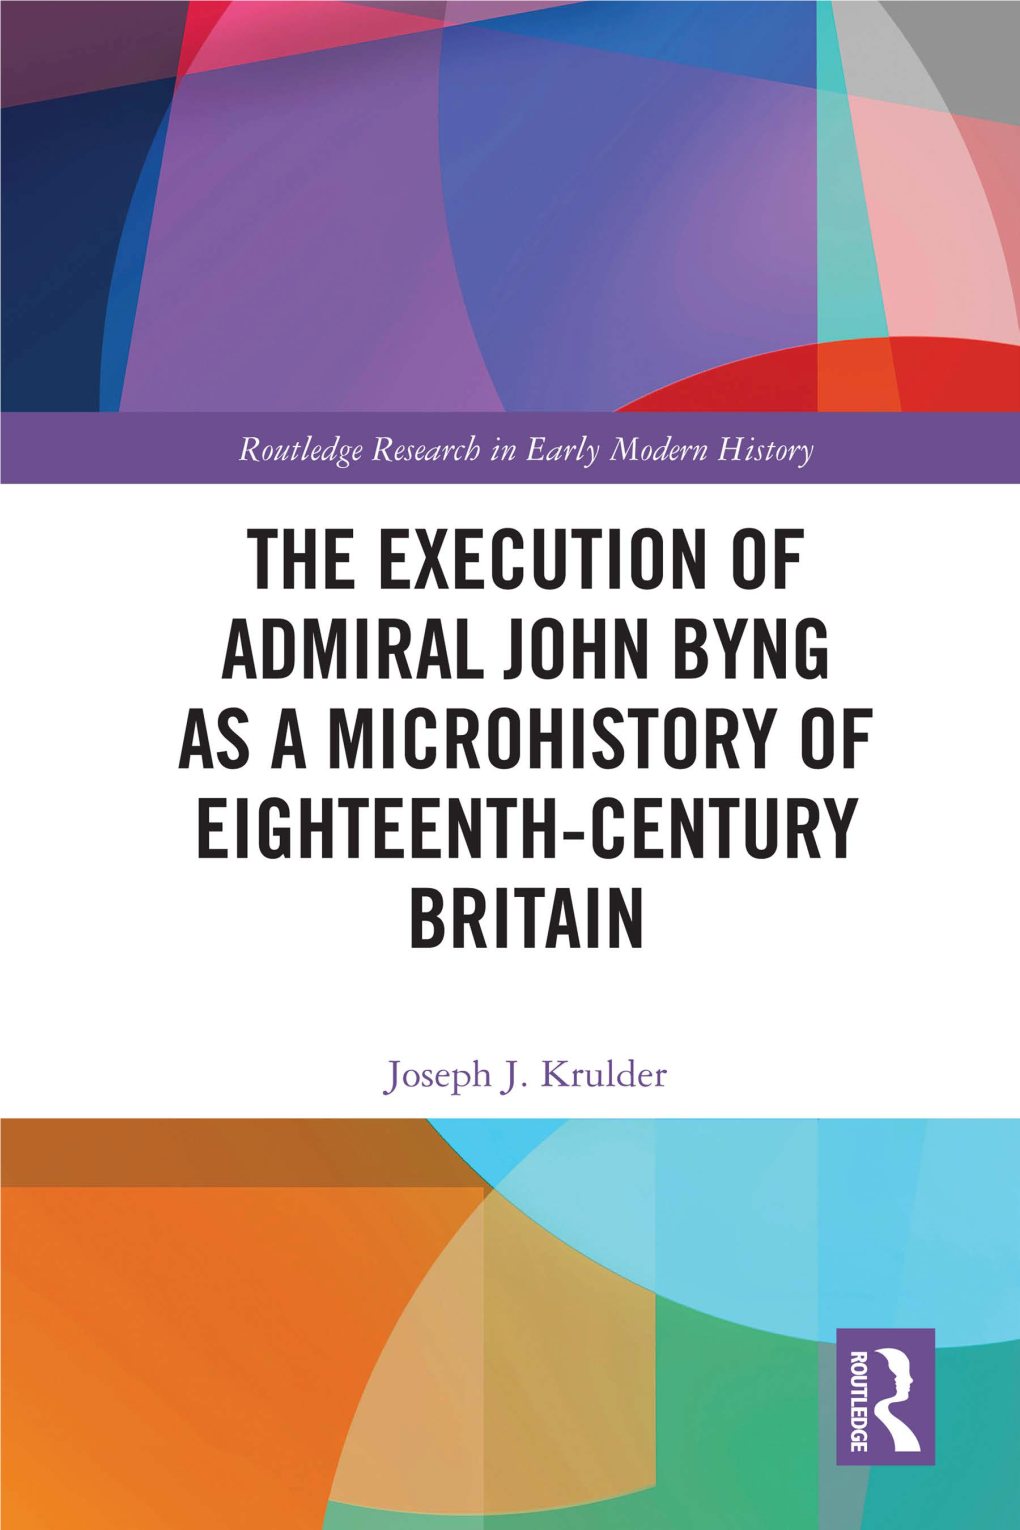 The Execution of Admiral John Byng As a Microhistory of Eighteenth-Century Britain